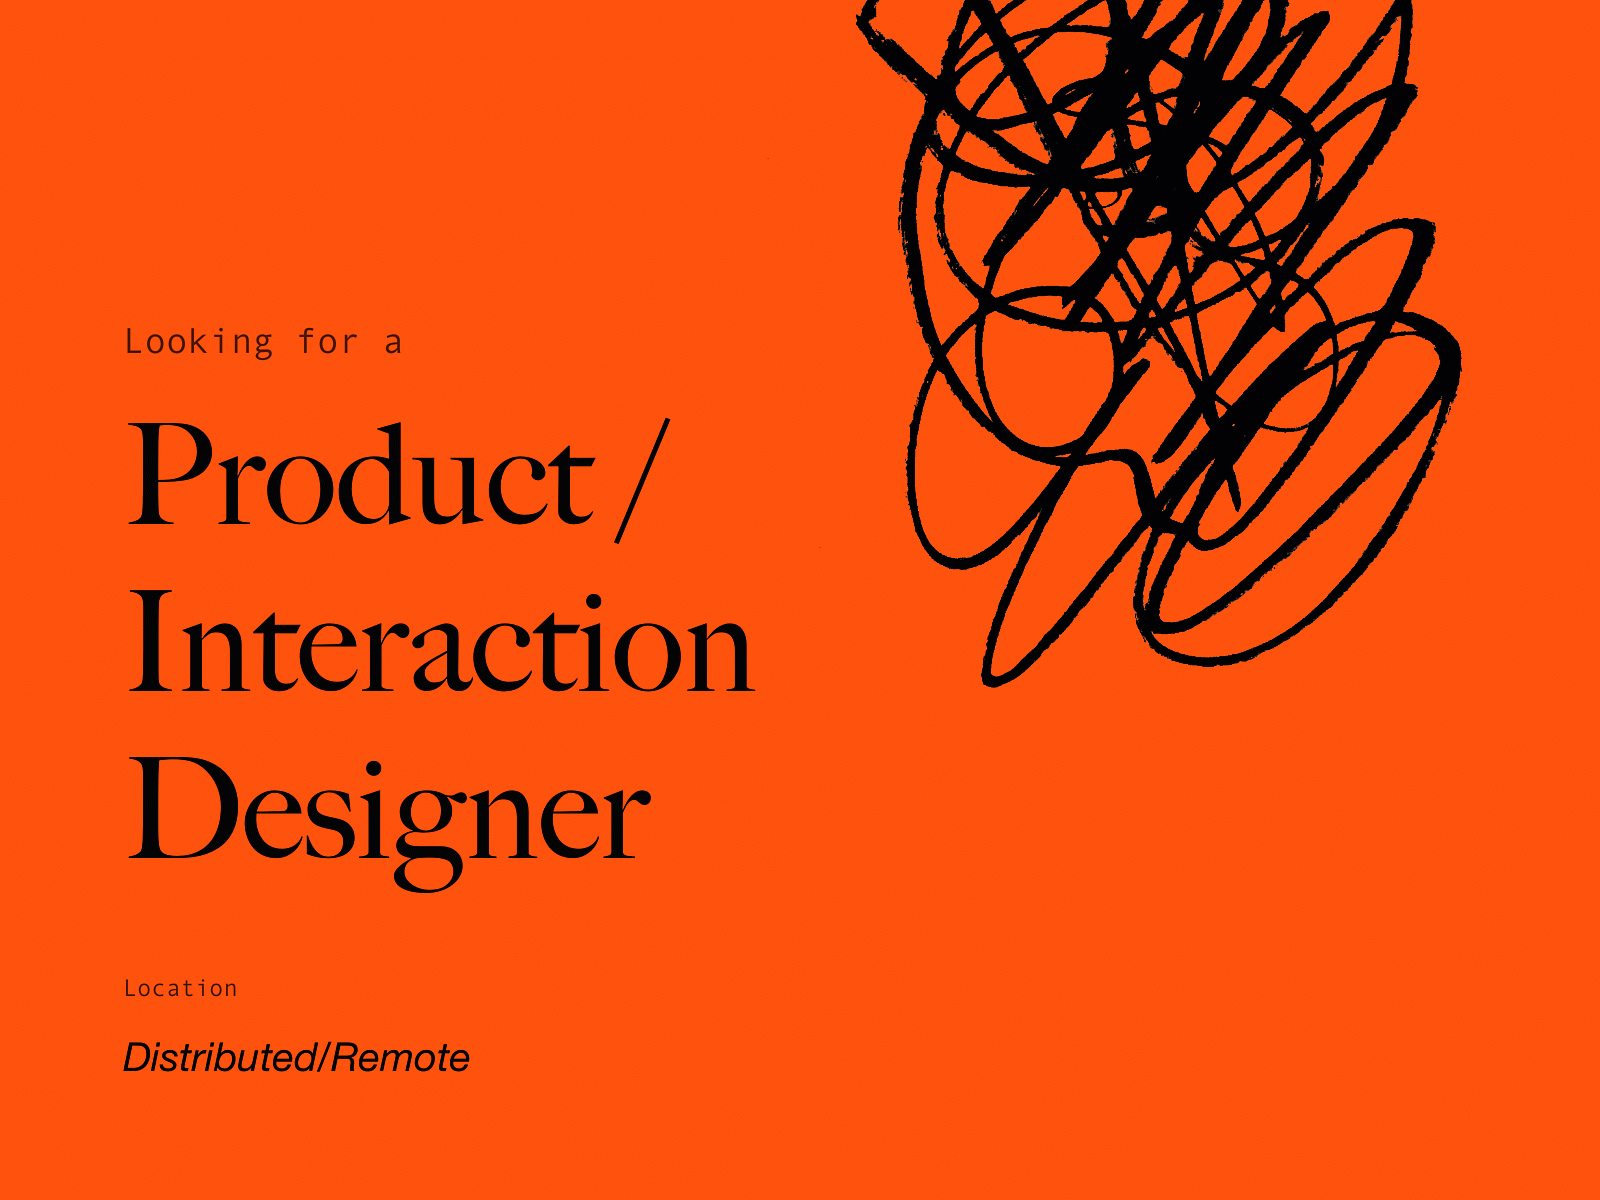 Looking for a designer! hiring interaction designer job job listing production designer visual designer